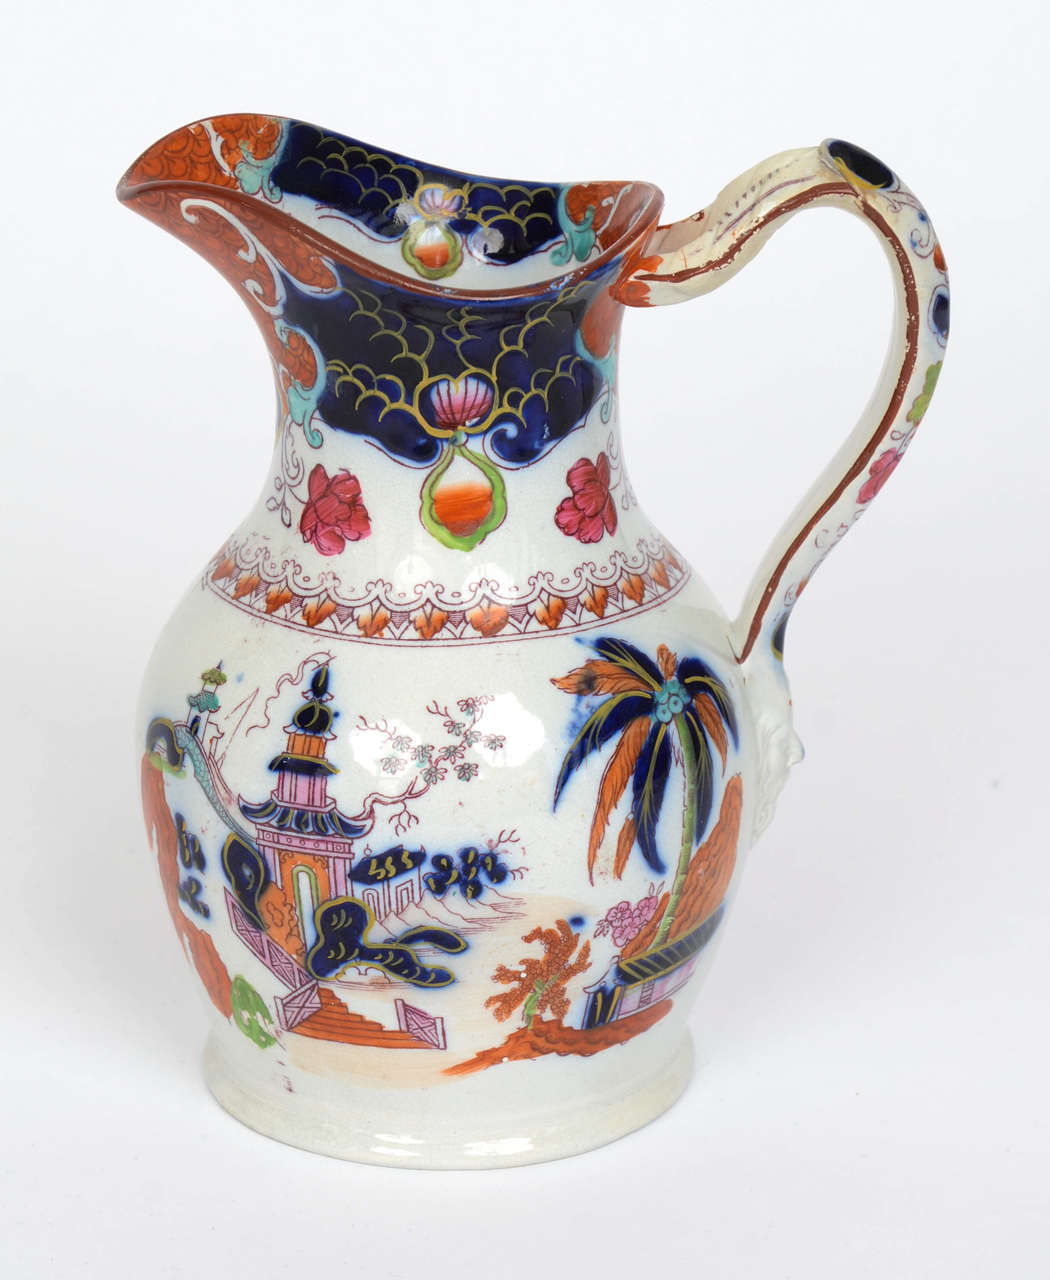 A very good example of an English pottery JUG or PITCHER

The jug has an ovoid form with an excellent loop handle, having a twin loop at the upper terminal, joining to form a single loop and terminating in a mans face ( mask head) at the lower